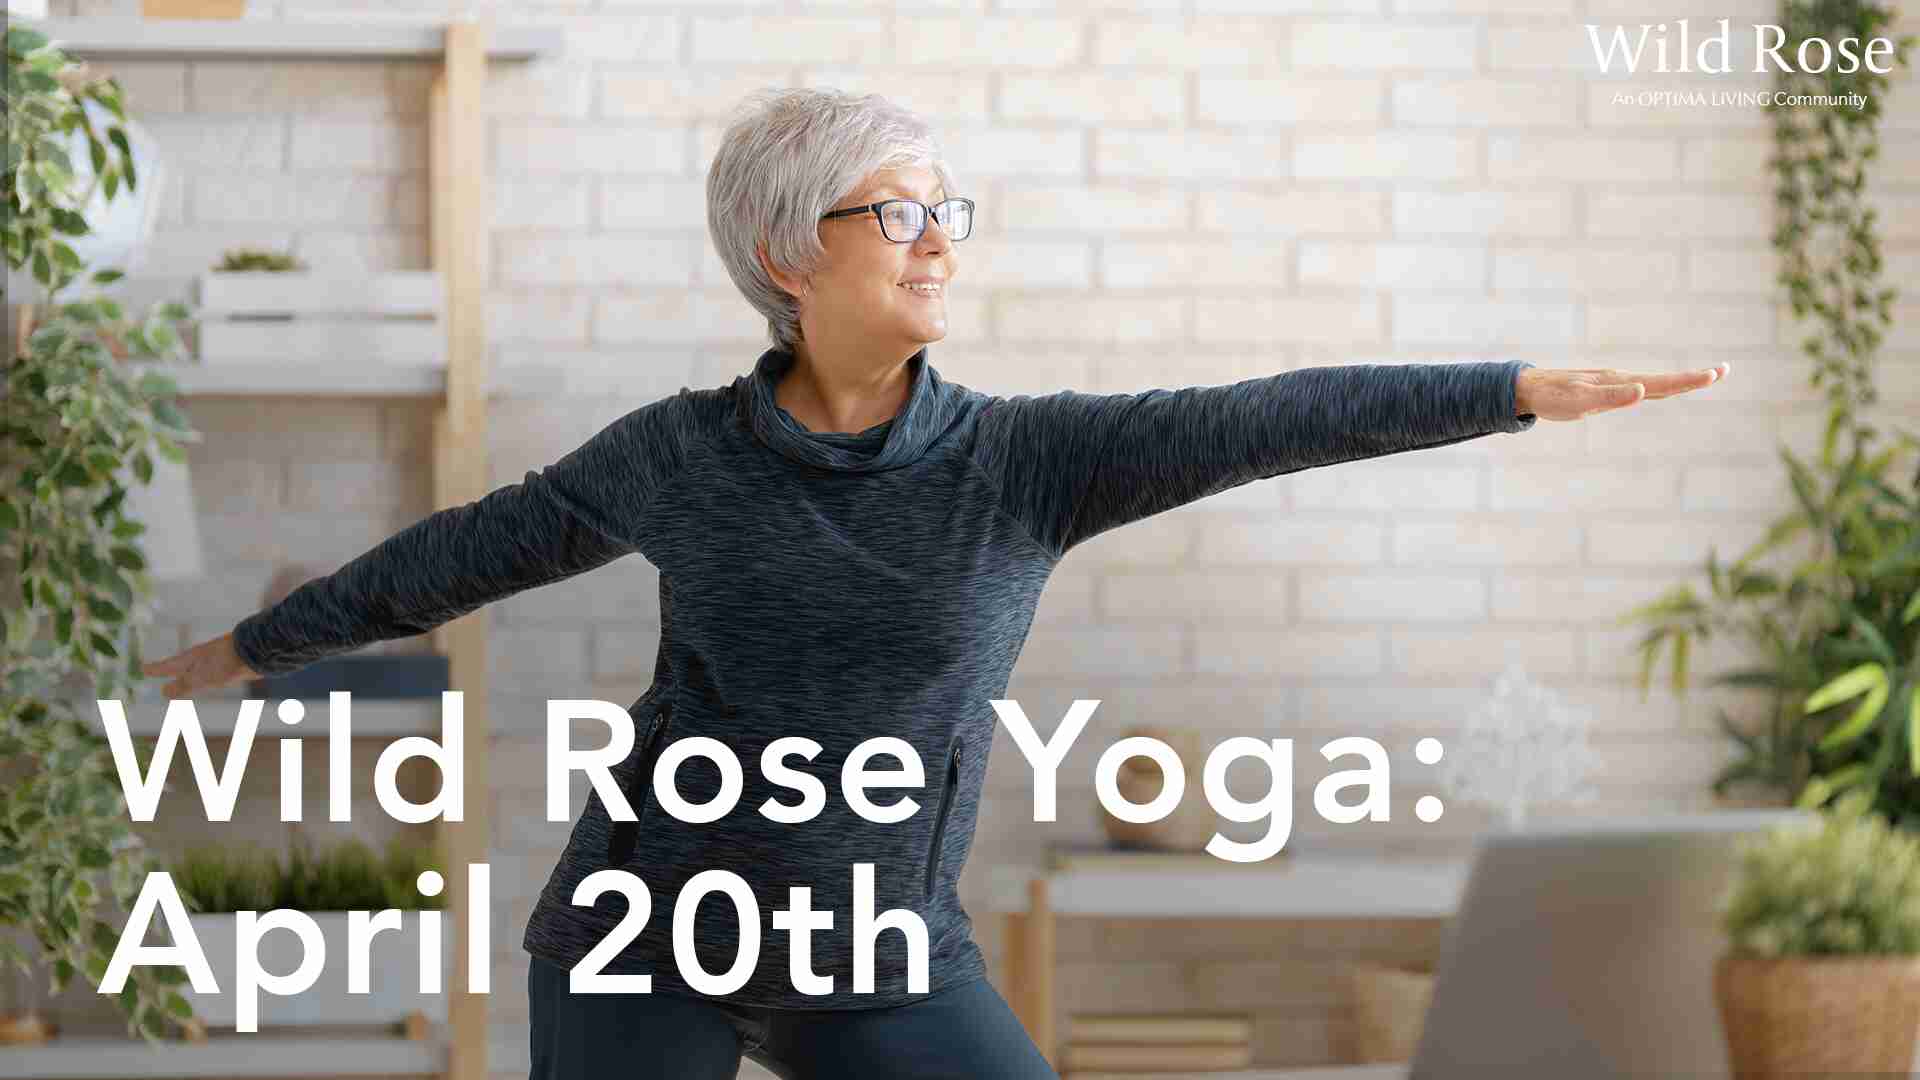 Stretching exercises for seniors at Wild Rose